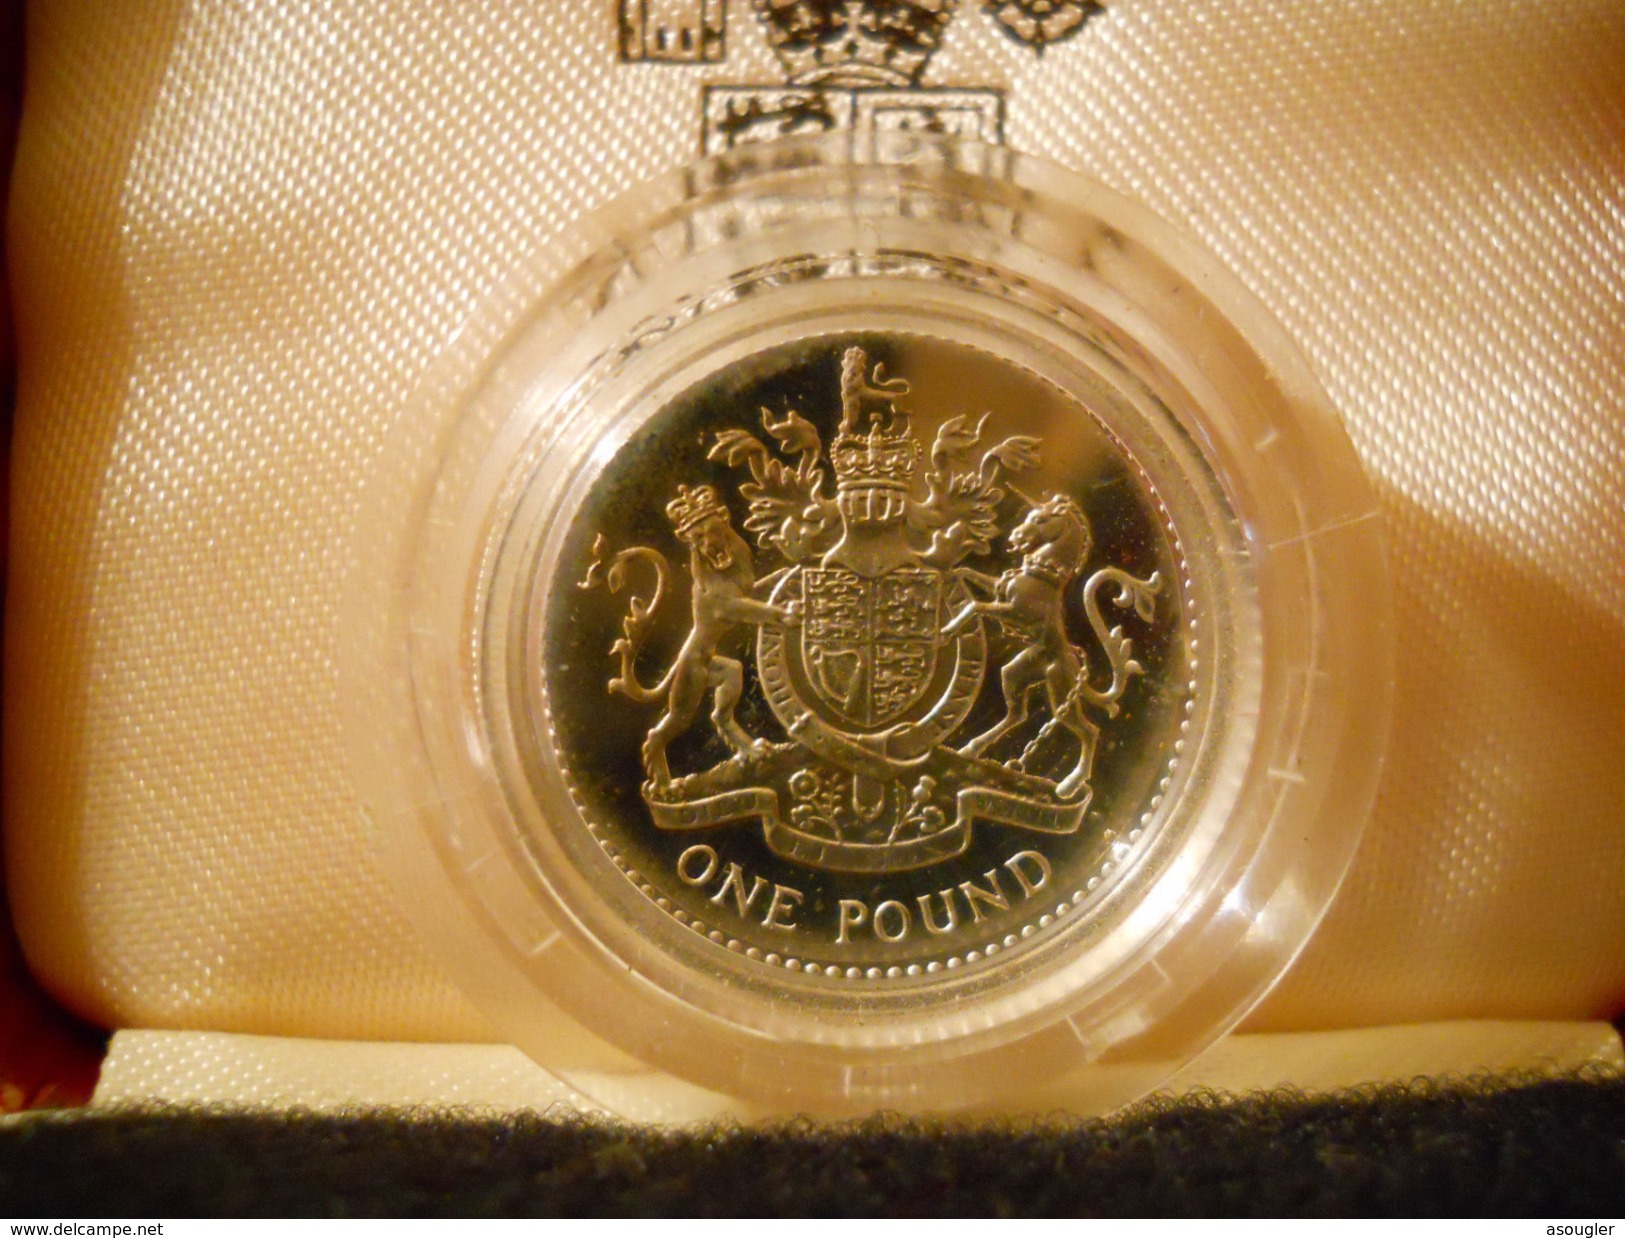 GREAT BRITAIN UK ENGLAND 1 POUND 1983 SILVER PROOF - 1 Pound